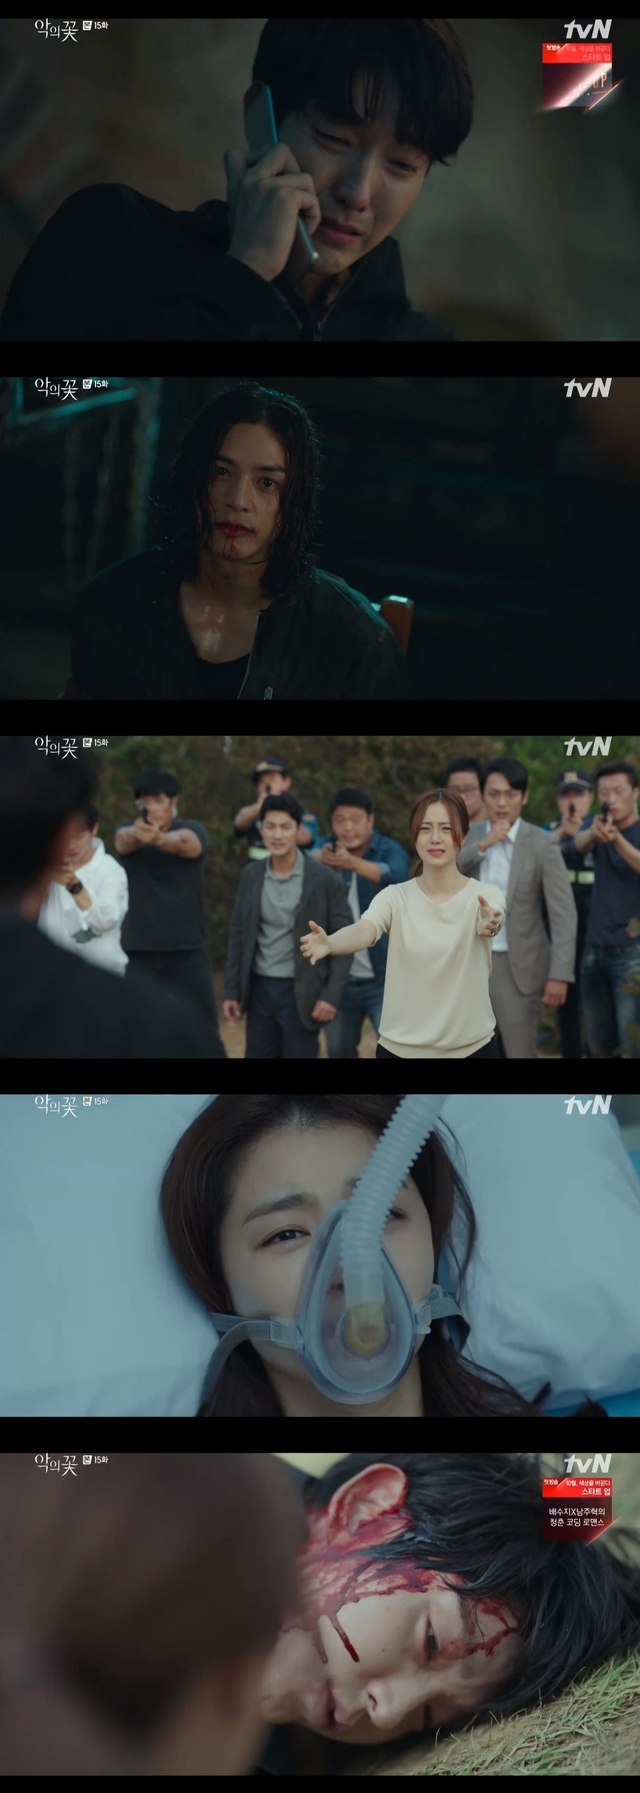 According to Nielsen Korea, a ratings agency on the 18th, TVN drama Flower of Evil broadcasted the previous day recorded an average of 5.5% and 6.2% in the metropolitan area based on cable, IPTV and satellite integrated paid platform.On this day, Do Hyun-soo (Lee Joon-gi) found the last survivor, Jung Mi-sook (Han Soo-yeon), who will prove the reality of Baek Hee-seong (Kim Ji-hoon) by dealing with Yeom Sang-cheol (Kim Ki-moo).Also, the trap he set up finally caught the Baek Hee-seong, and the case seemed to be finished.However, the frenzied provocation of Baek Hee-seong, who brought up the ID of his wife Cha JiWon (Moon Chae-won) and the story of his daughter, made Do Hyun-soo lose his reason.On the other hand, Kim Moo-jin (Seo Hyun-woo) angered Baek Man-woo (Son Jong-hak), who pretended not to know his sons nature, and Gong Mi-ja (Nam Ki-ae), who hurt Do Hae-soo (Jang Hee-jin).This was also a remark to Kim Moo-jin himself, who ignored the truth in fear, who believed that the identity of the sack seen in the basement of Do Min-seok (Choi Byung-mo), a young murderer, was not a person but an elk.Cha JiWon and the police, who grasped the truth of the incident, moved with all their strength, and Do Hyun-soo and Baek Hee-seong reached the end of the cliff.Cha JiWons voice stopped him when Do Hyun-soo, who was stained with sadness and pain while exhaling life, finally raised his knife toward Baek Hee-seong.However, Do Hyun-soo, who suffered from the ghost of his dead father again, could not distinguish whether she was real or created by herself.Cha JiWon, who saw him suffering, persuaded him with a tearing heart, and Do Hyun-soo, who still had confused eyes, slowly approached her.Thats when Baek Hee-Seong took the gun from the police who came to overpower him.Do Hyun-soo saw the gun toward Cha JiWon and blew up and wrapped her around her, and the police also shot him the moment Baek Hee-seong pulled the trigger.After two quick gunshots, Dohae opened his eyes, and Do Hyun-soo closed his eyes with his head covered in blood.With the end of Do Hyun-soo, who was greeted from the cliff, the screen reflected the pure white space as if it were the consciousness of Do Hyun-soo, which was approaching the sabbath.Do Hyun-soo, who slept with a happy smile on Cha JiWons warm words, Now rest easy, was a good thing.Meanwhile, the final meeting of Flower of Evil will be broadcast at 10:50 pm on the 23rd.